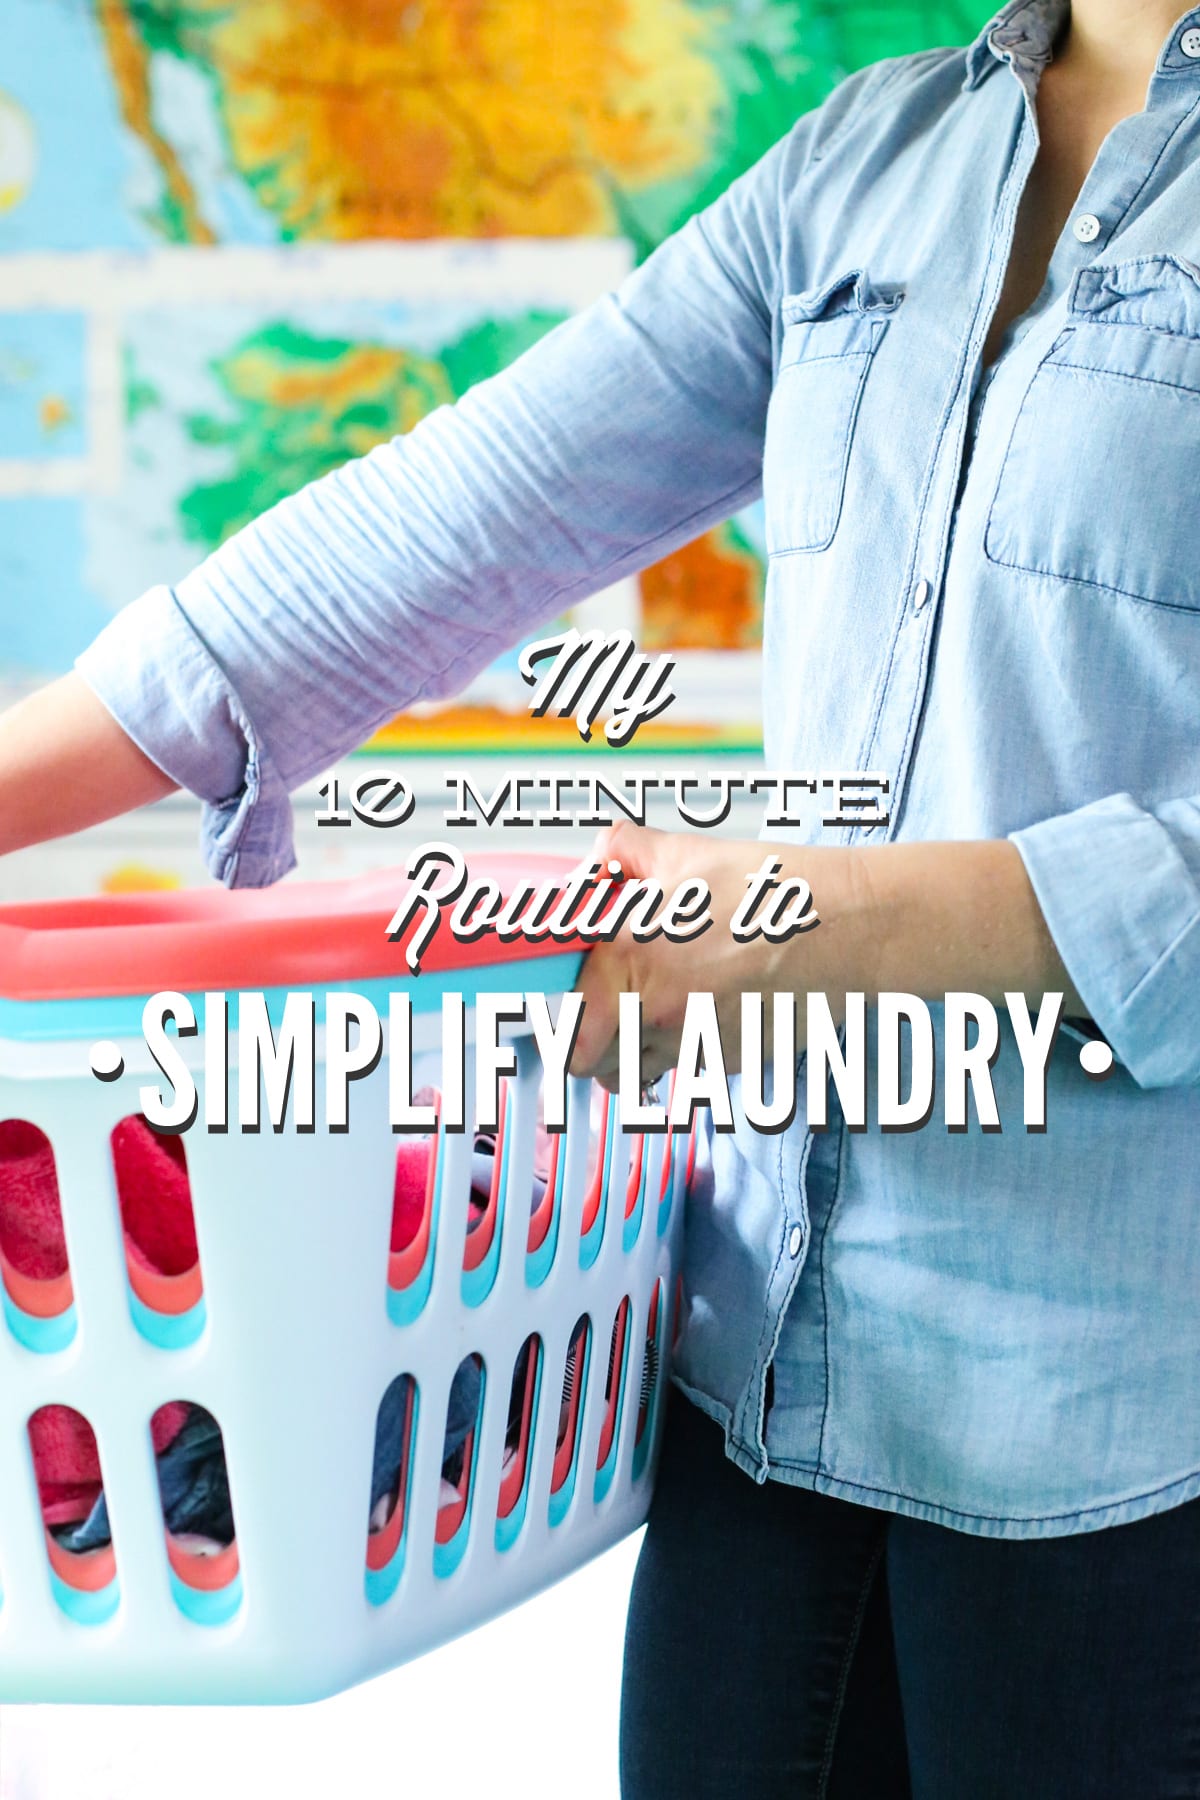 My Laundry Routine: No more laundry piles! A simple approach to laundry!